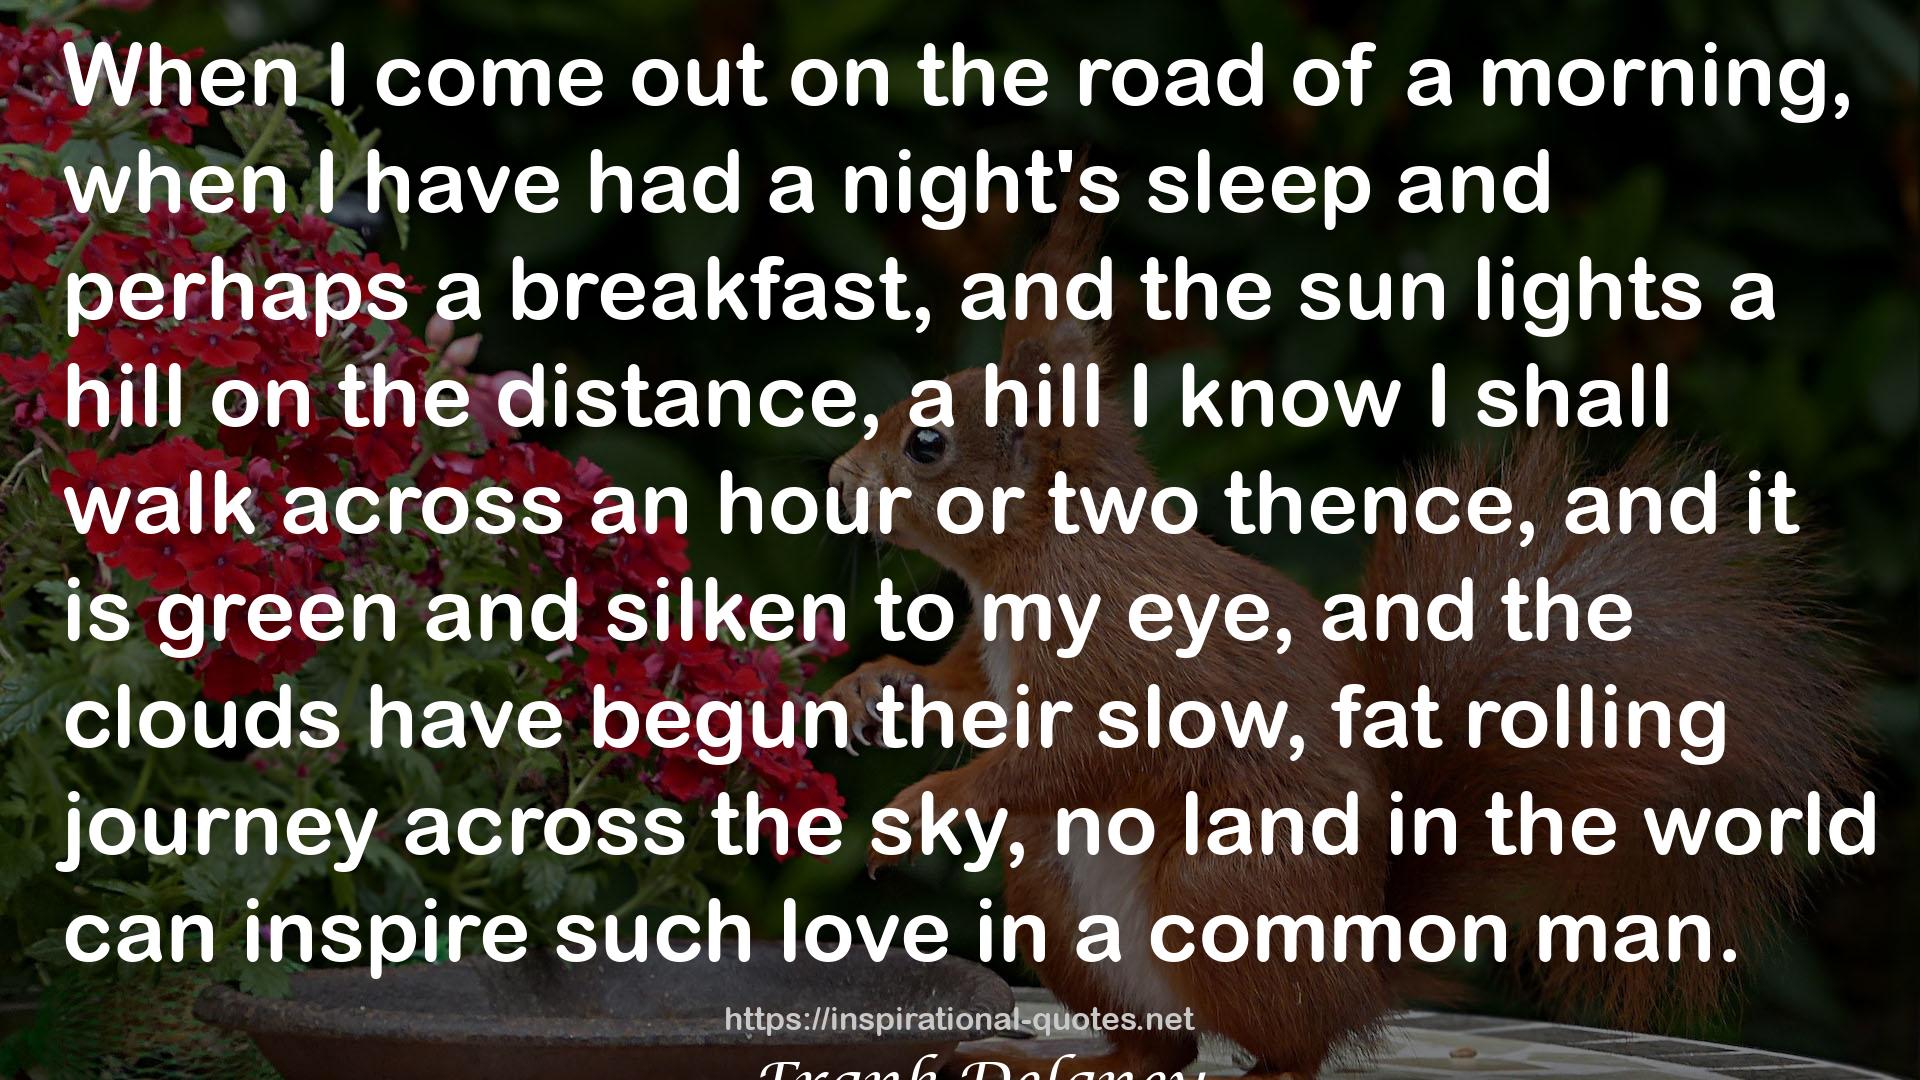 their slow, fat rolling journey  QUOTES